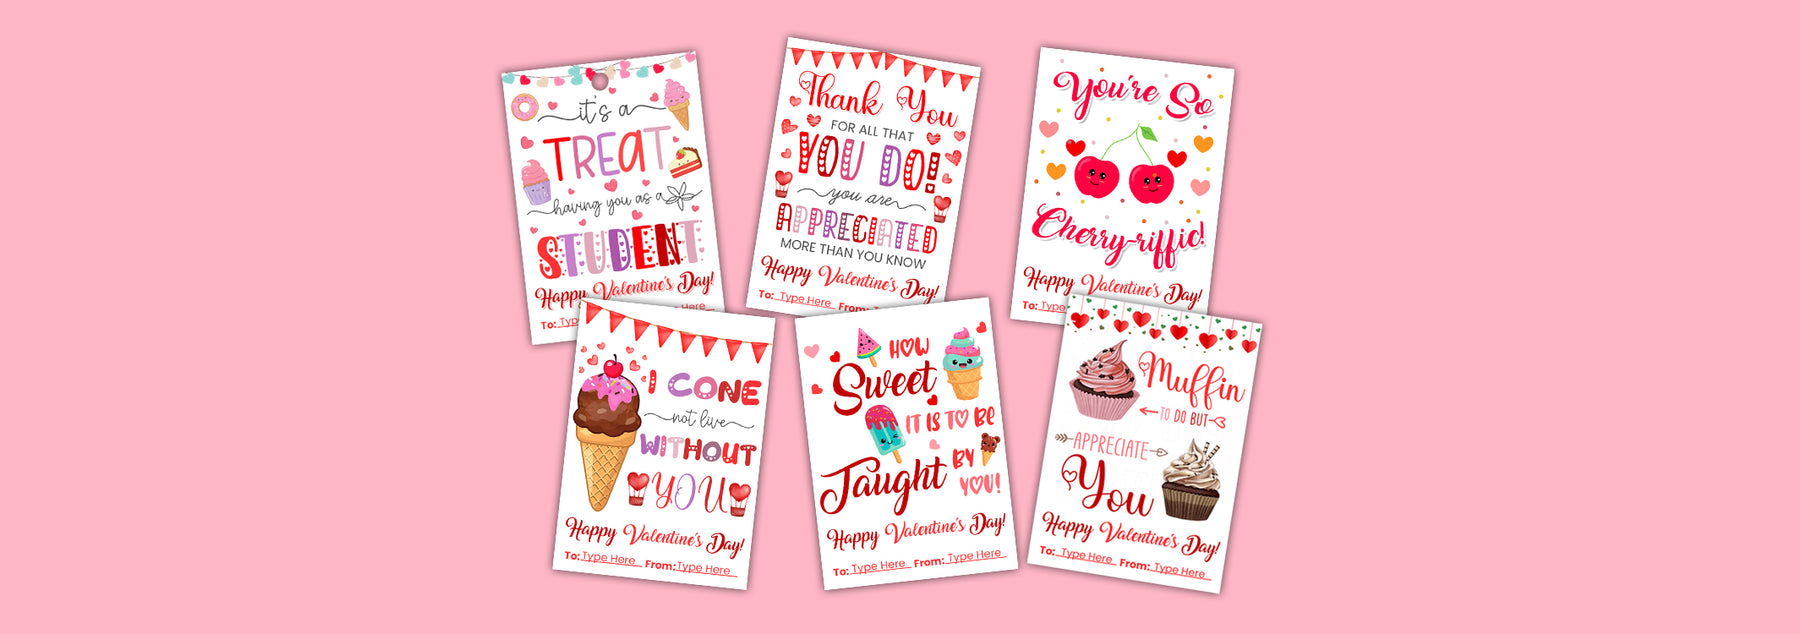 From the Heart: Printable Gift Tags for Valentine's Day that Show You Care